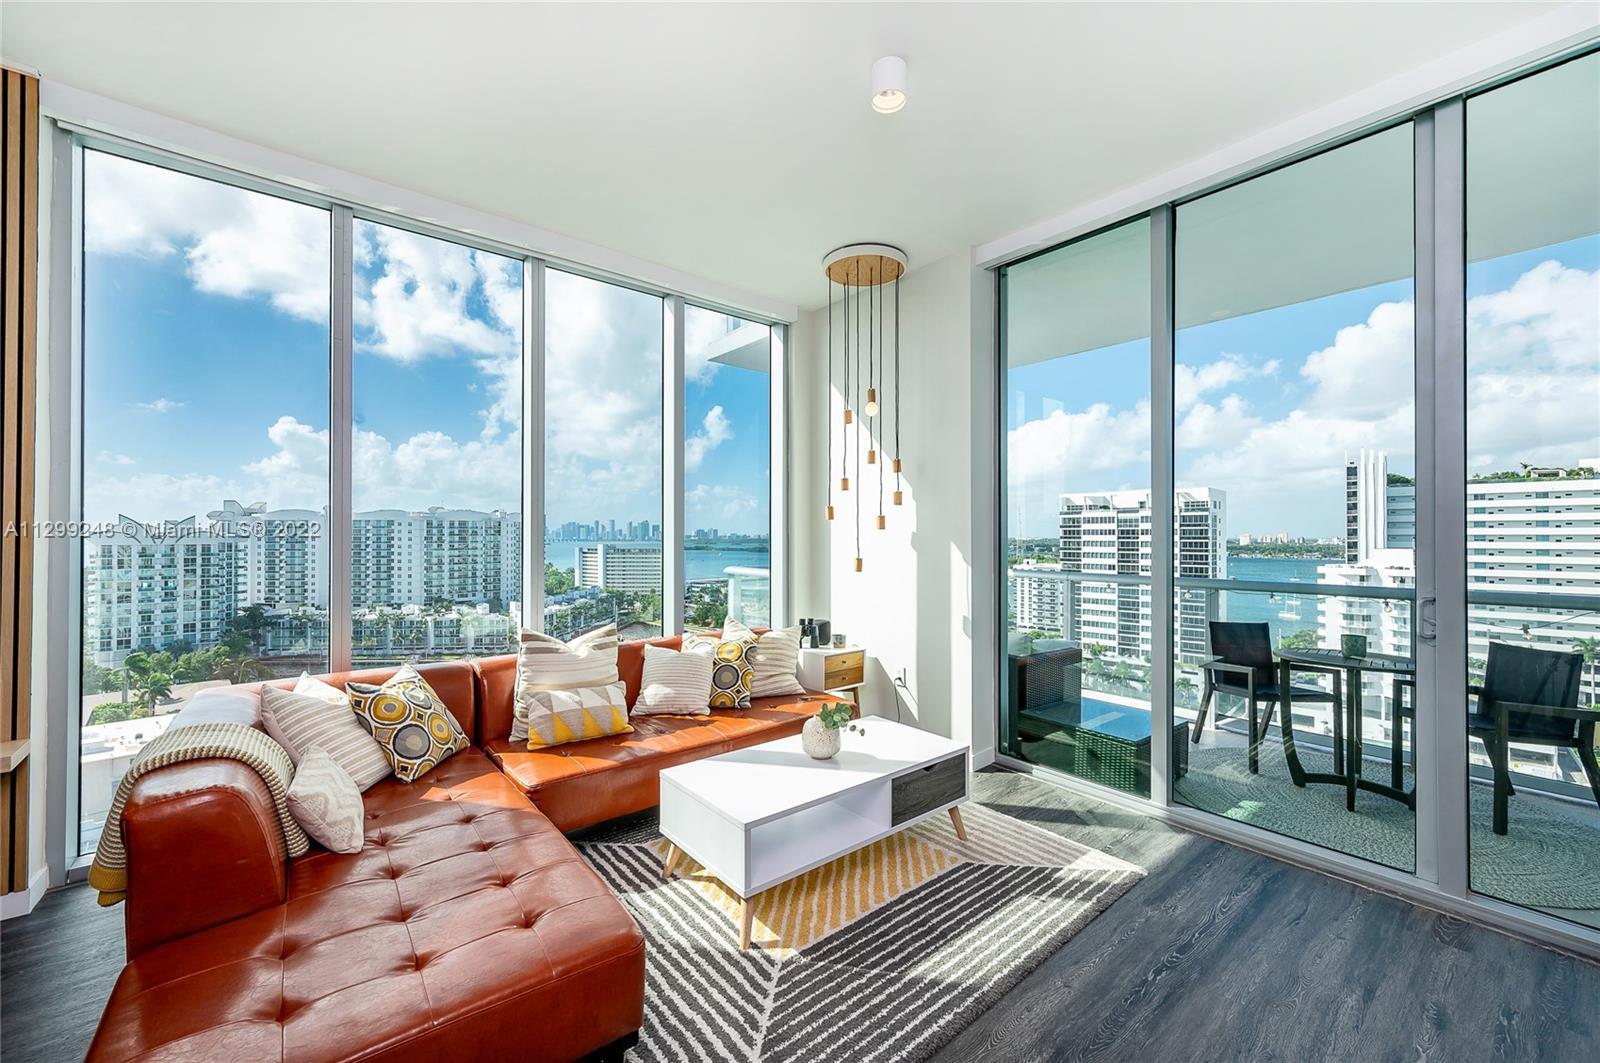 Stunning rarely available corner unit overlooking Biscayne Bay! Enjoy sunsets, Miami skyline, & wate